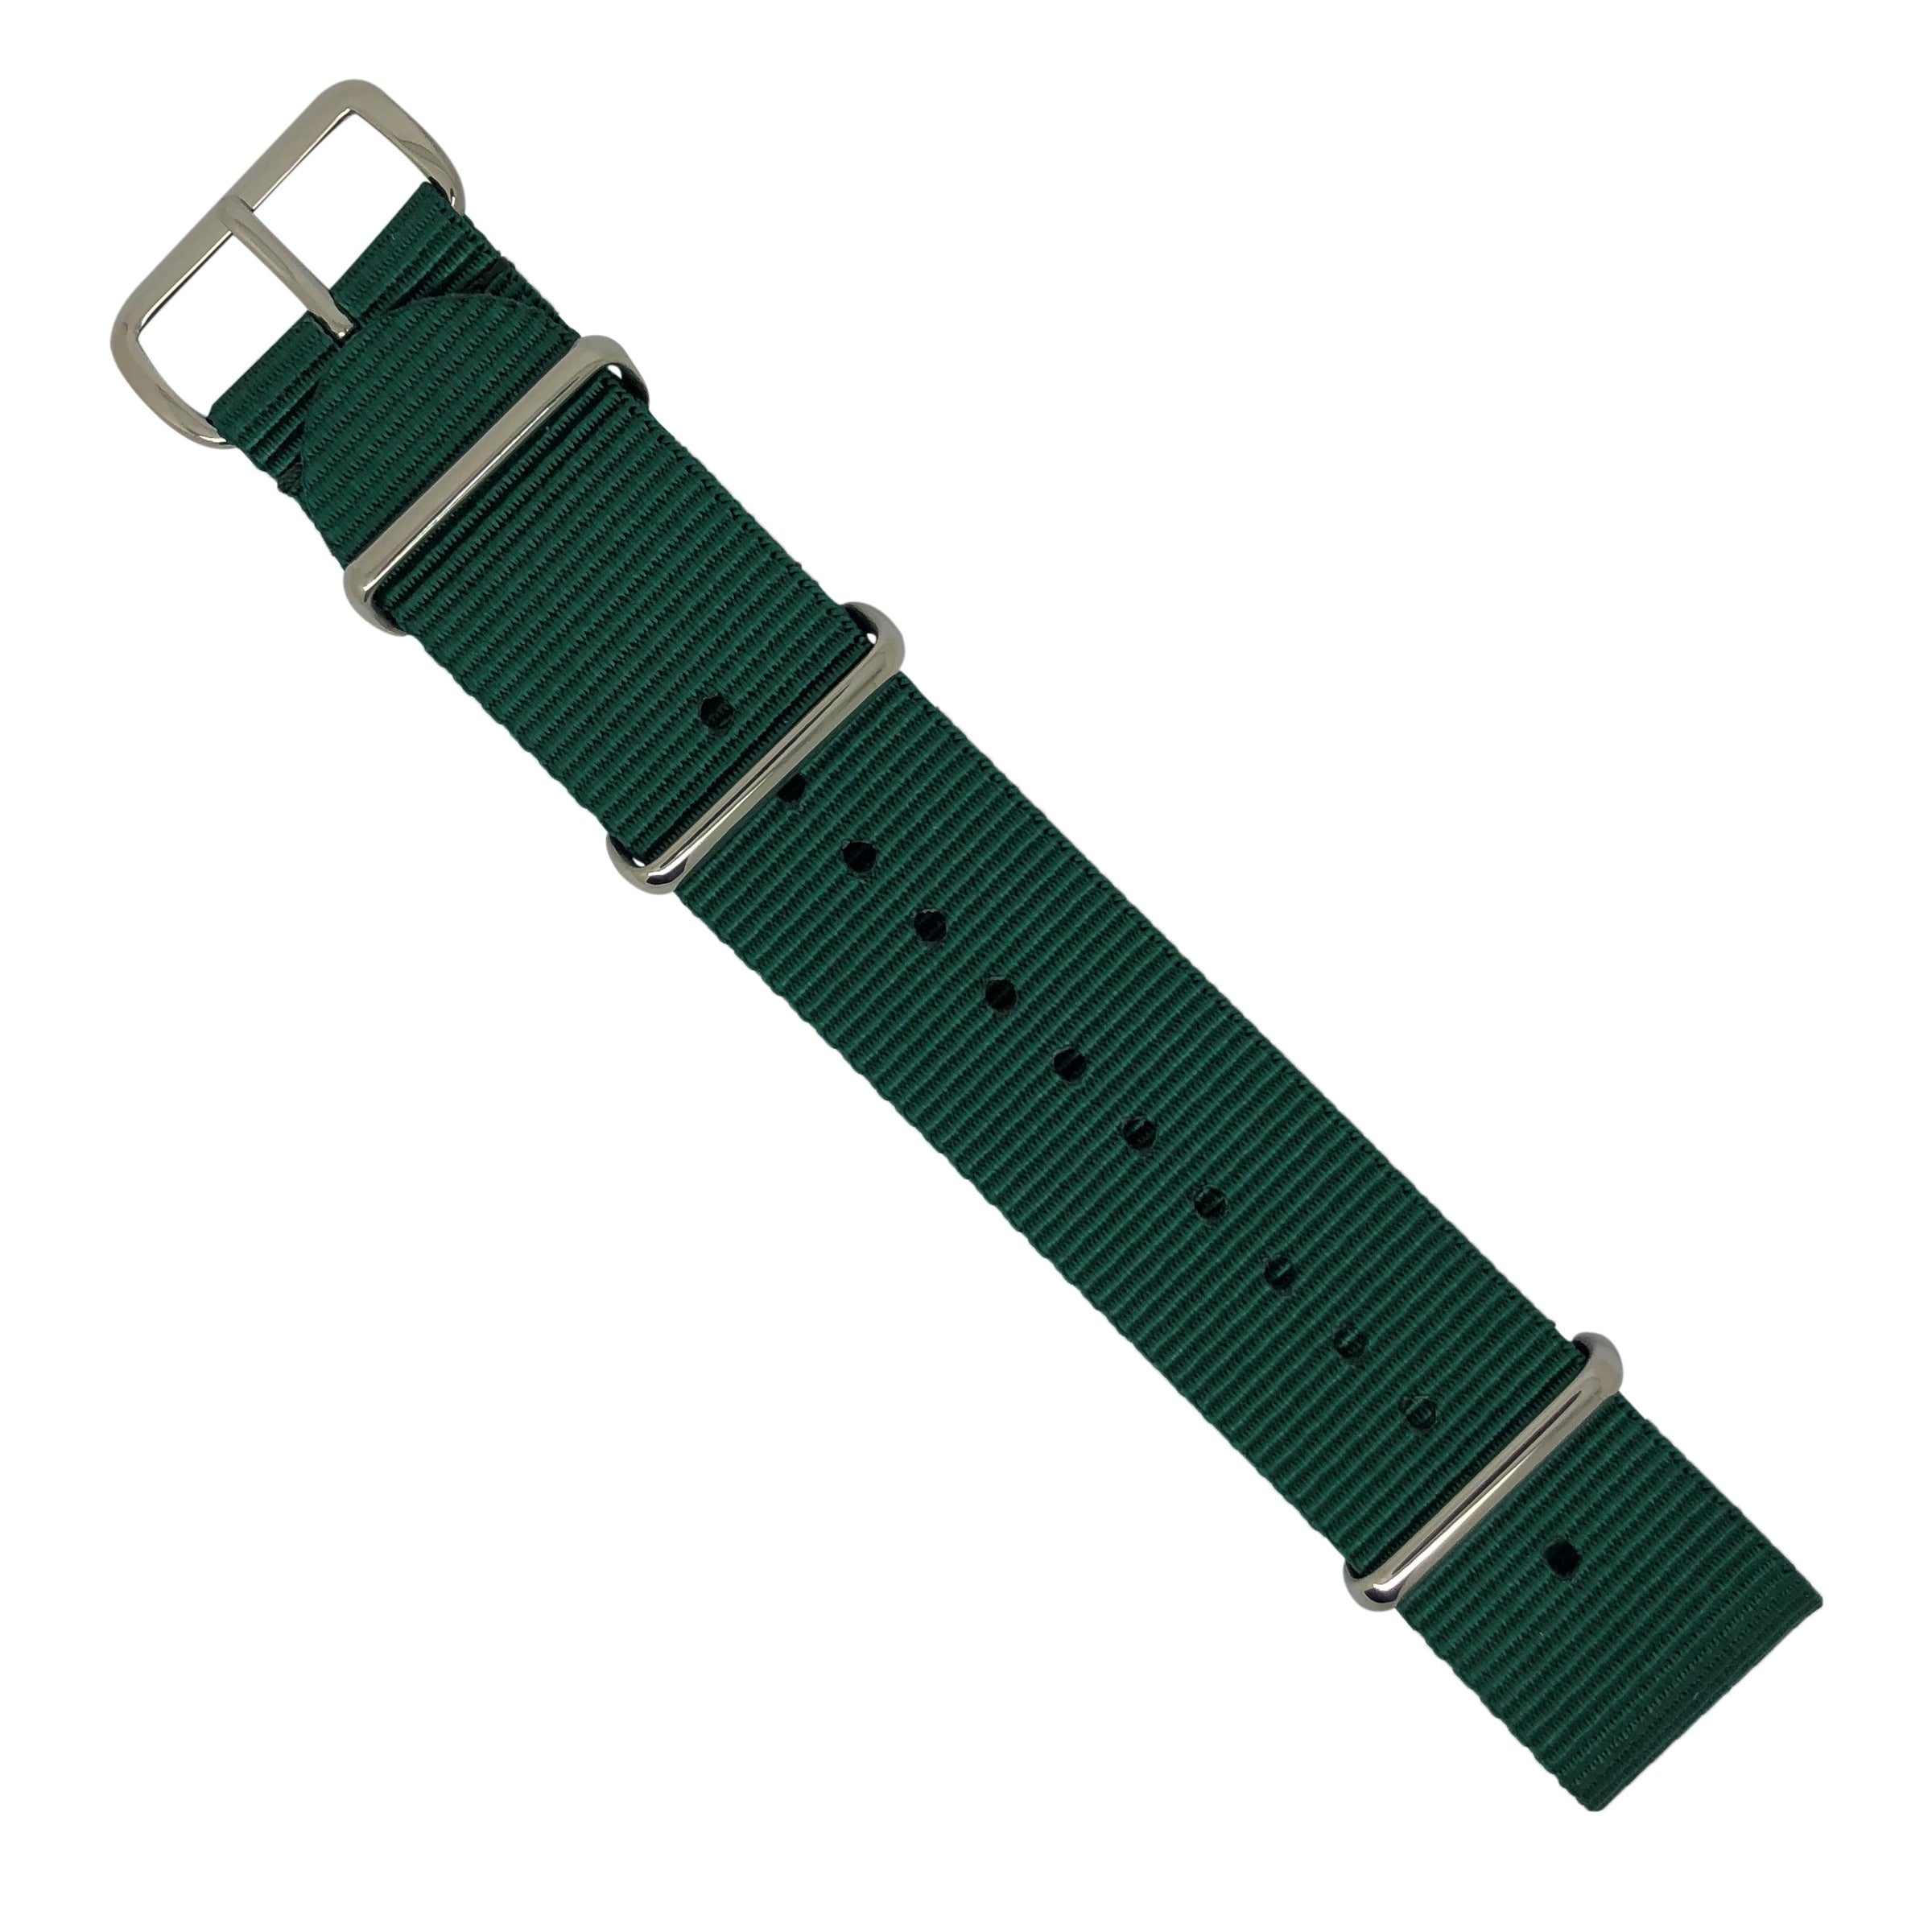 Premium Nato Strap in Forest Green with Polished Silver Buckle (22mm) - Nomad watch Works